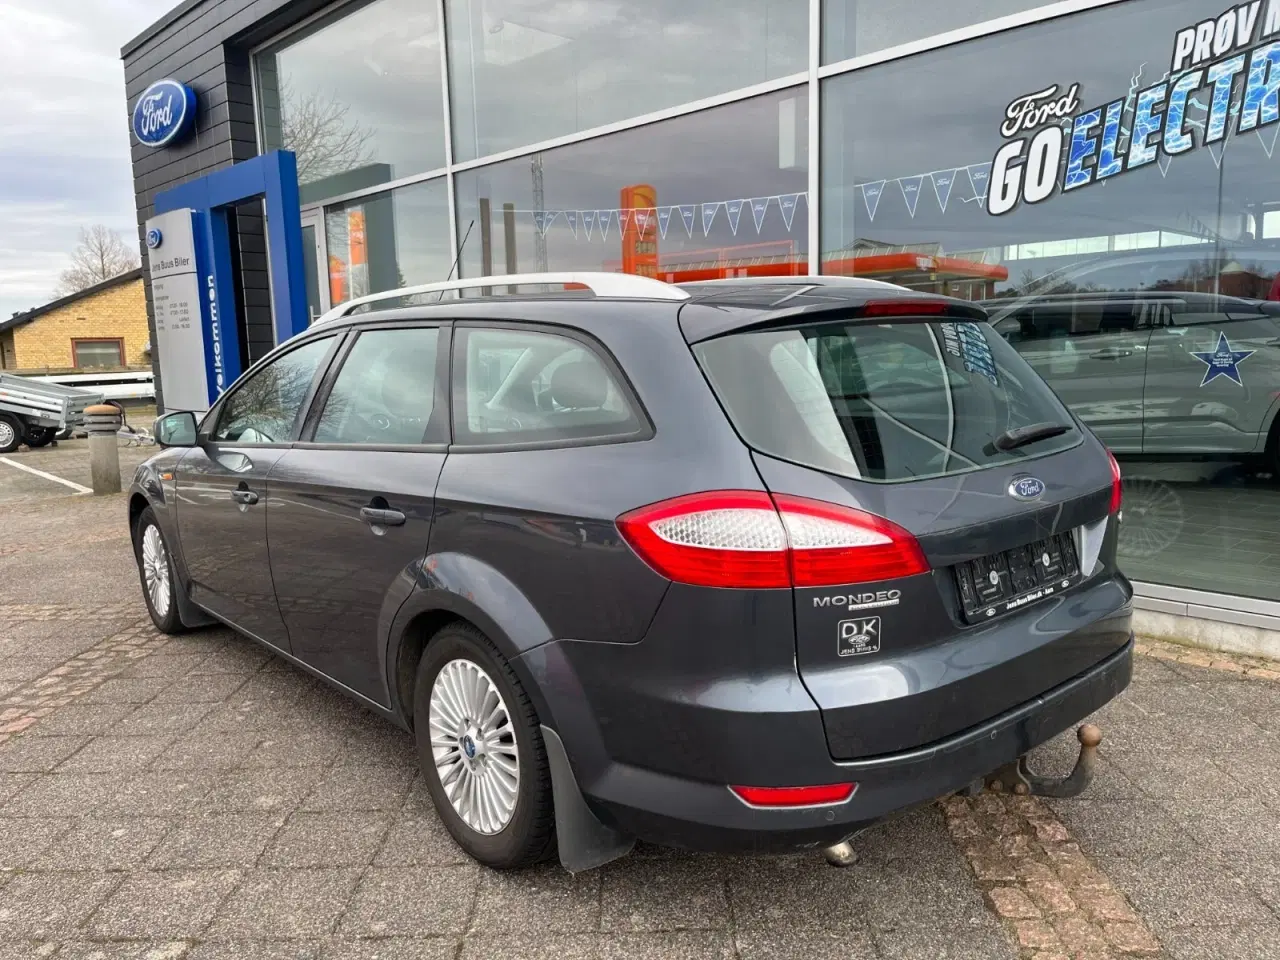 Billede 6 - Ford Mondeo 2,0 TDCi 115 ECOnetic stc.